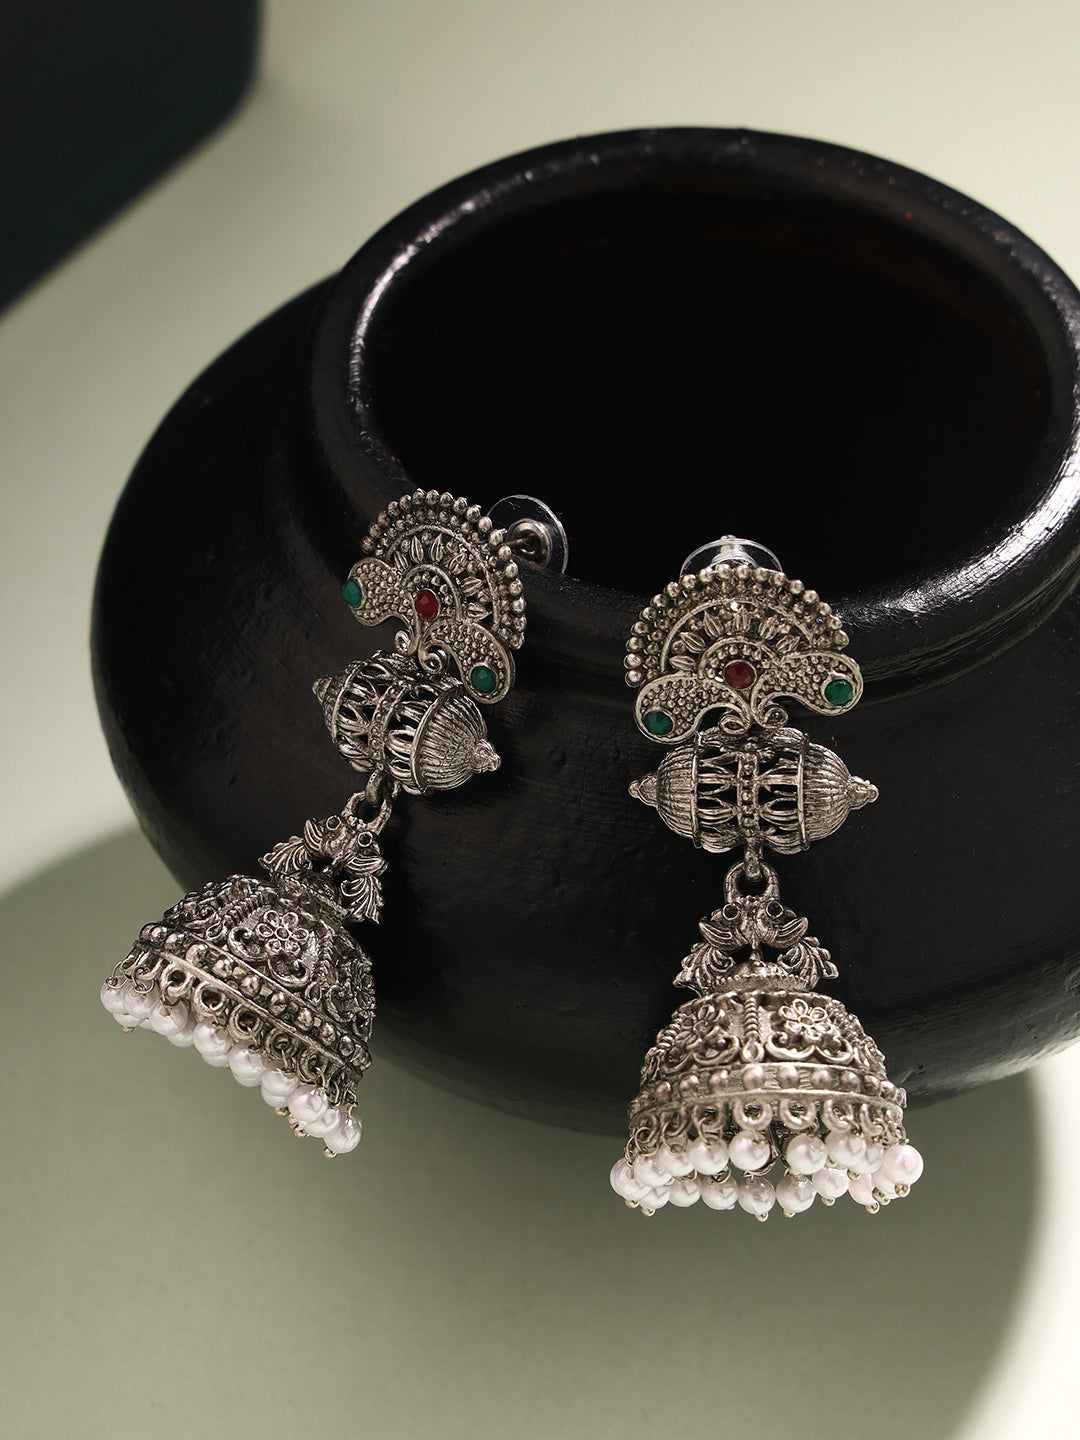 Priyaasi Harmony in Heritage with Tribal and Floral Jhumkas